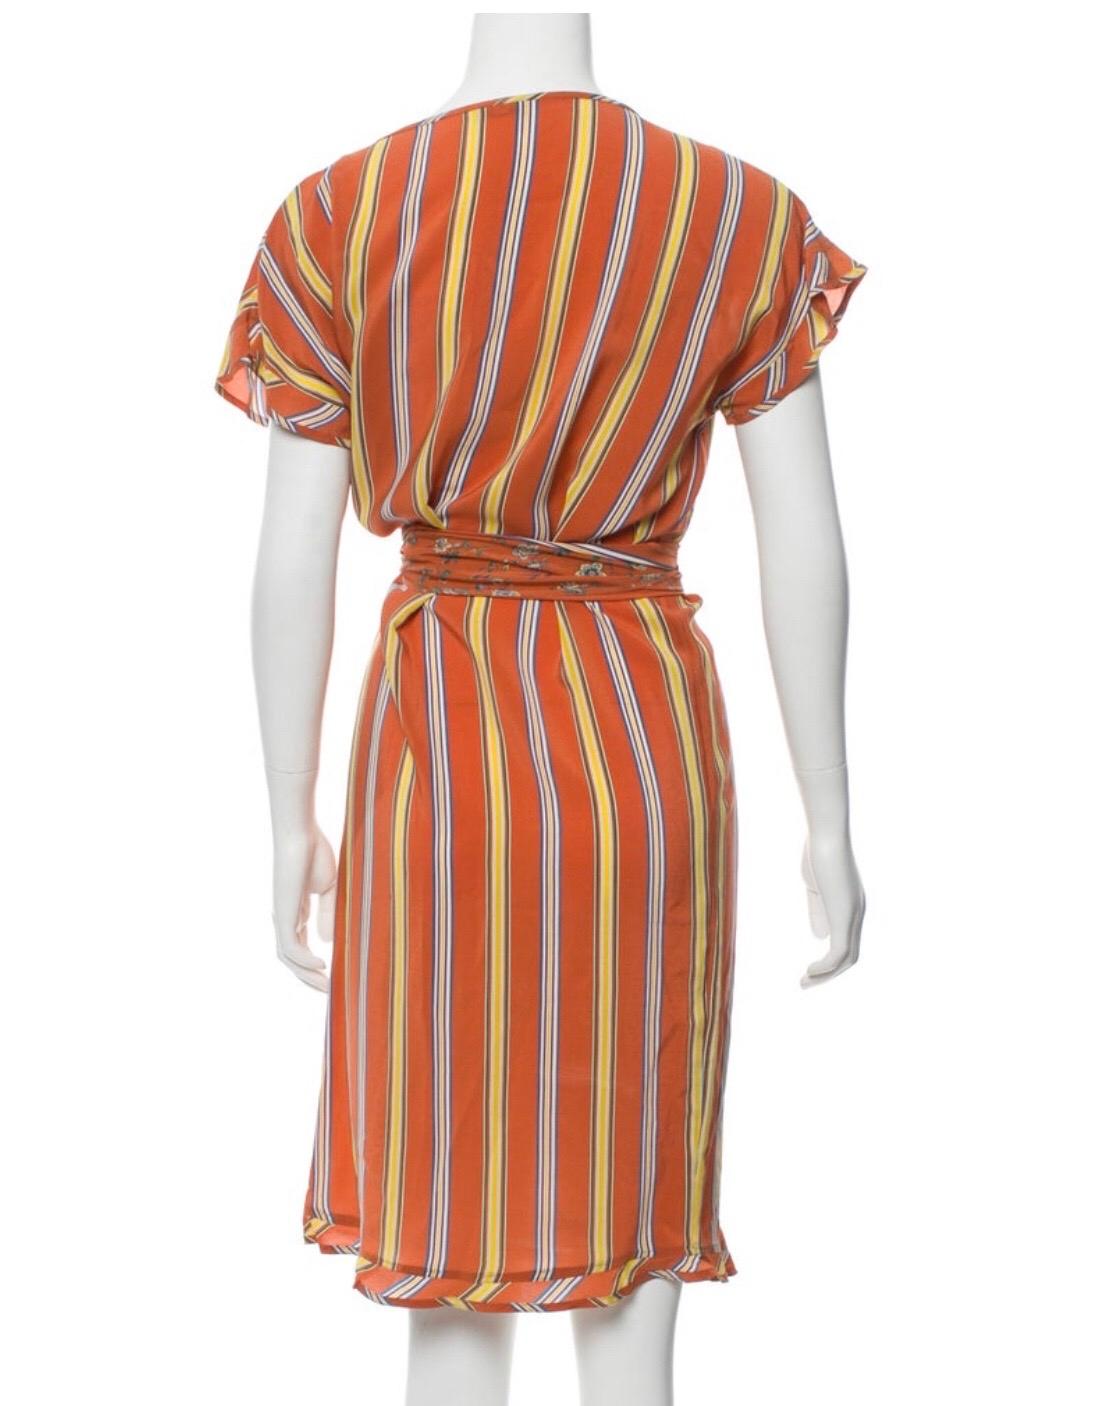 Gianni Versace silk striped and floral dress with removable belt. Condition Excellent. Size M